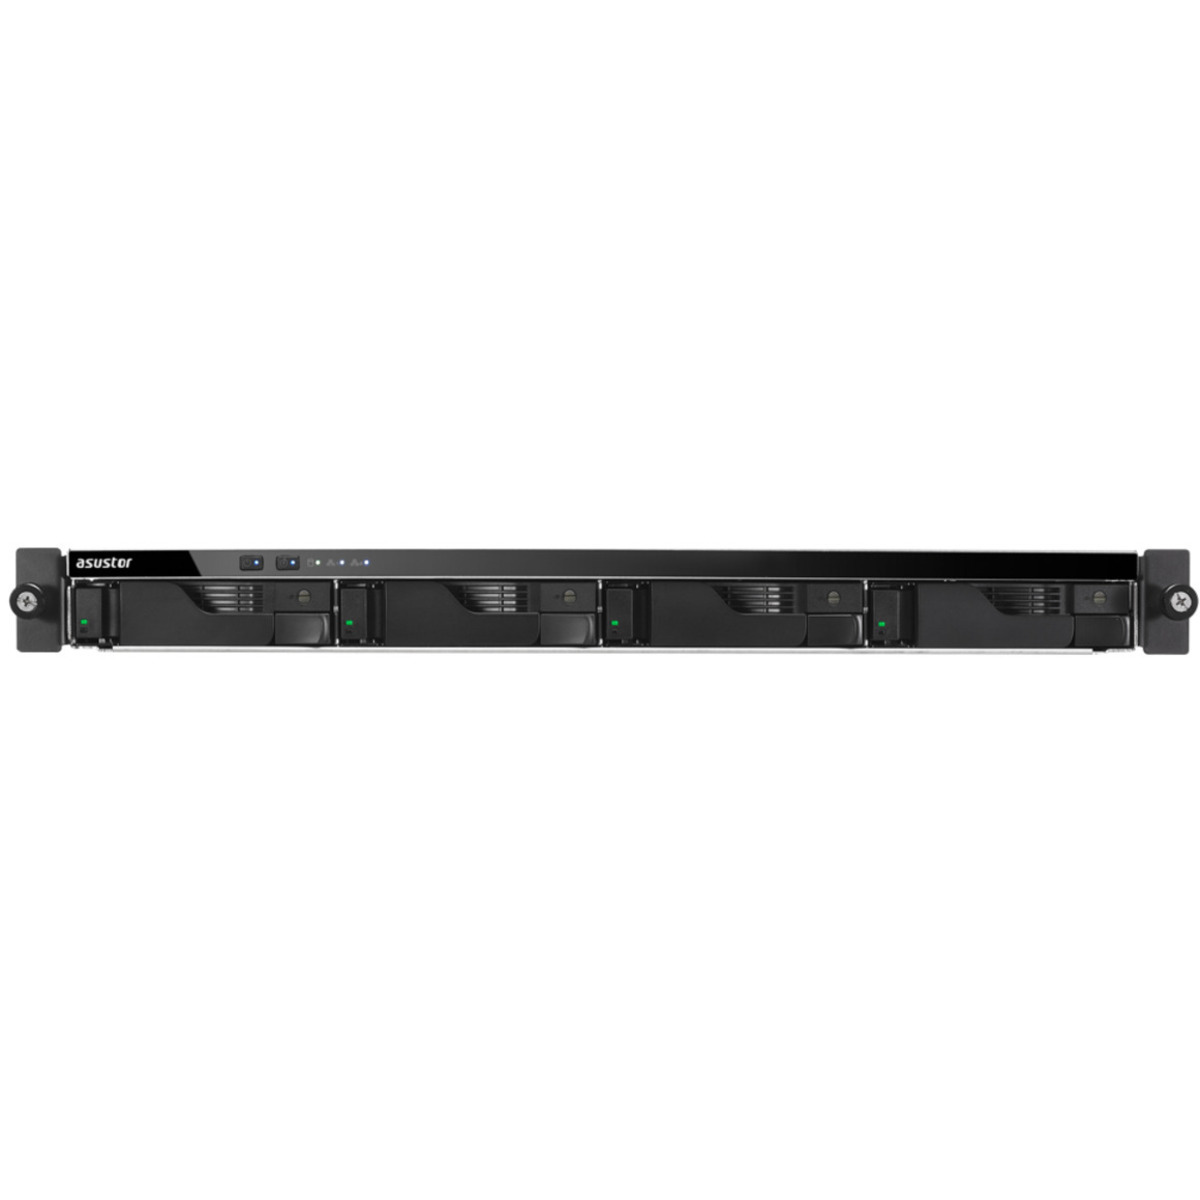 ASUSTOR LOCKERSTOR 4RS AS6504RS 16tb 4-Bay RackMount Multimedia / Power User / Business NAS - Network Attached Storage Device 4x4tb Western Digital Red Pro WD4005FFBX 3.5 7200rpm SATA 6Gb/s HDD NAS Class Drives Installed - Burn-In Tested - FREE RAM UPGRADE LOCKERSTOR 4RS AS6504RS